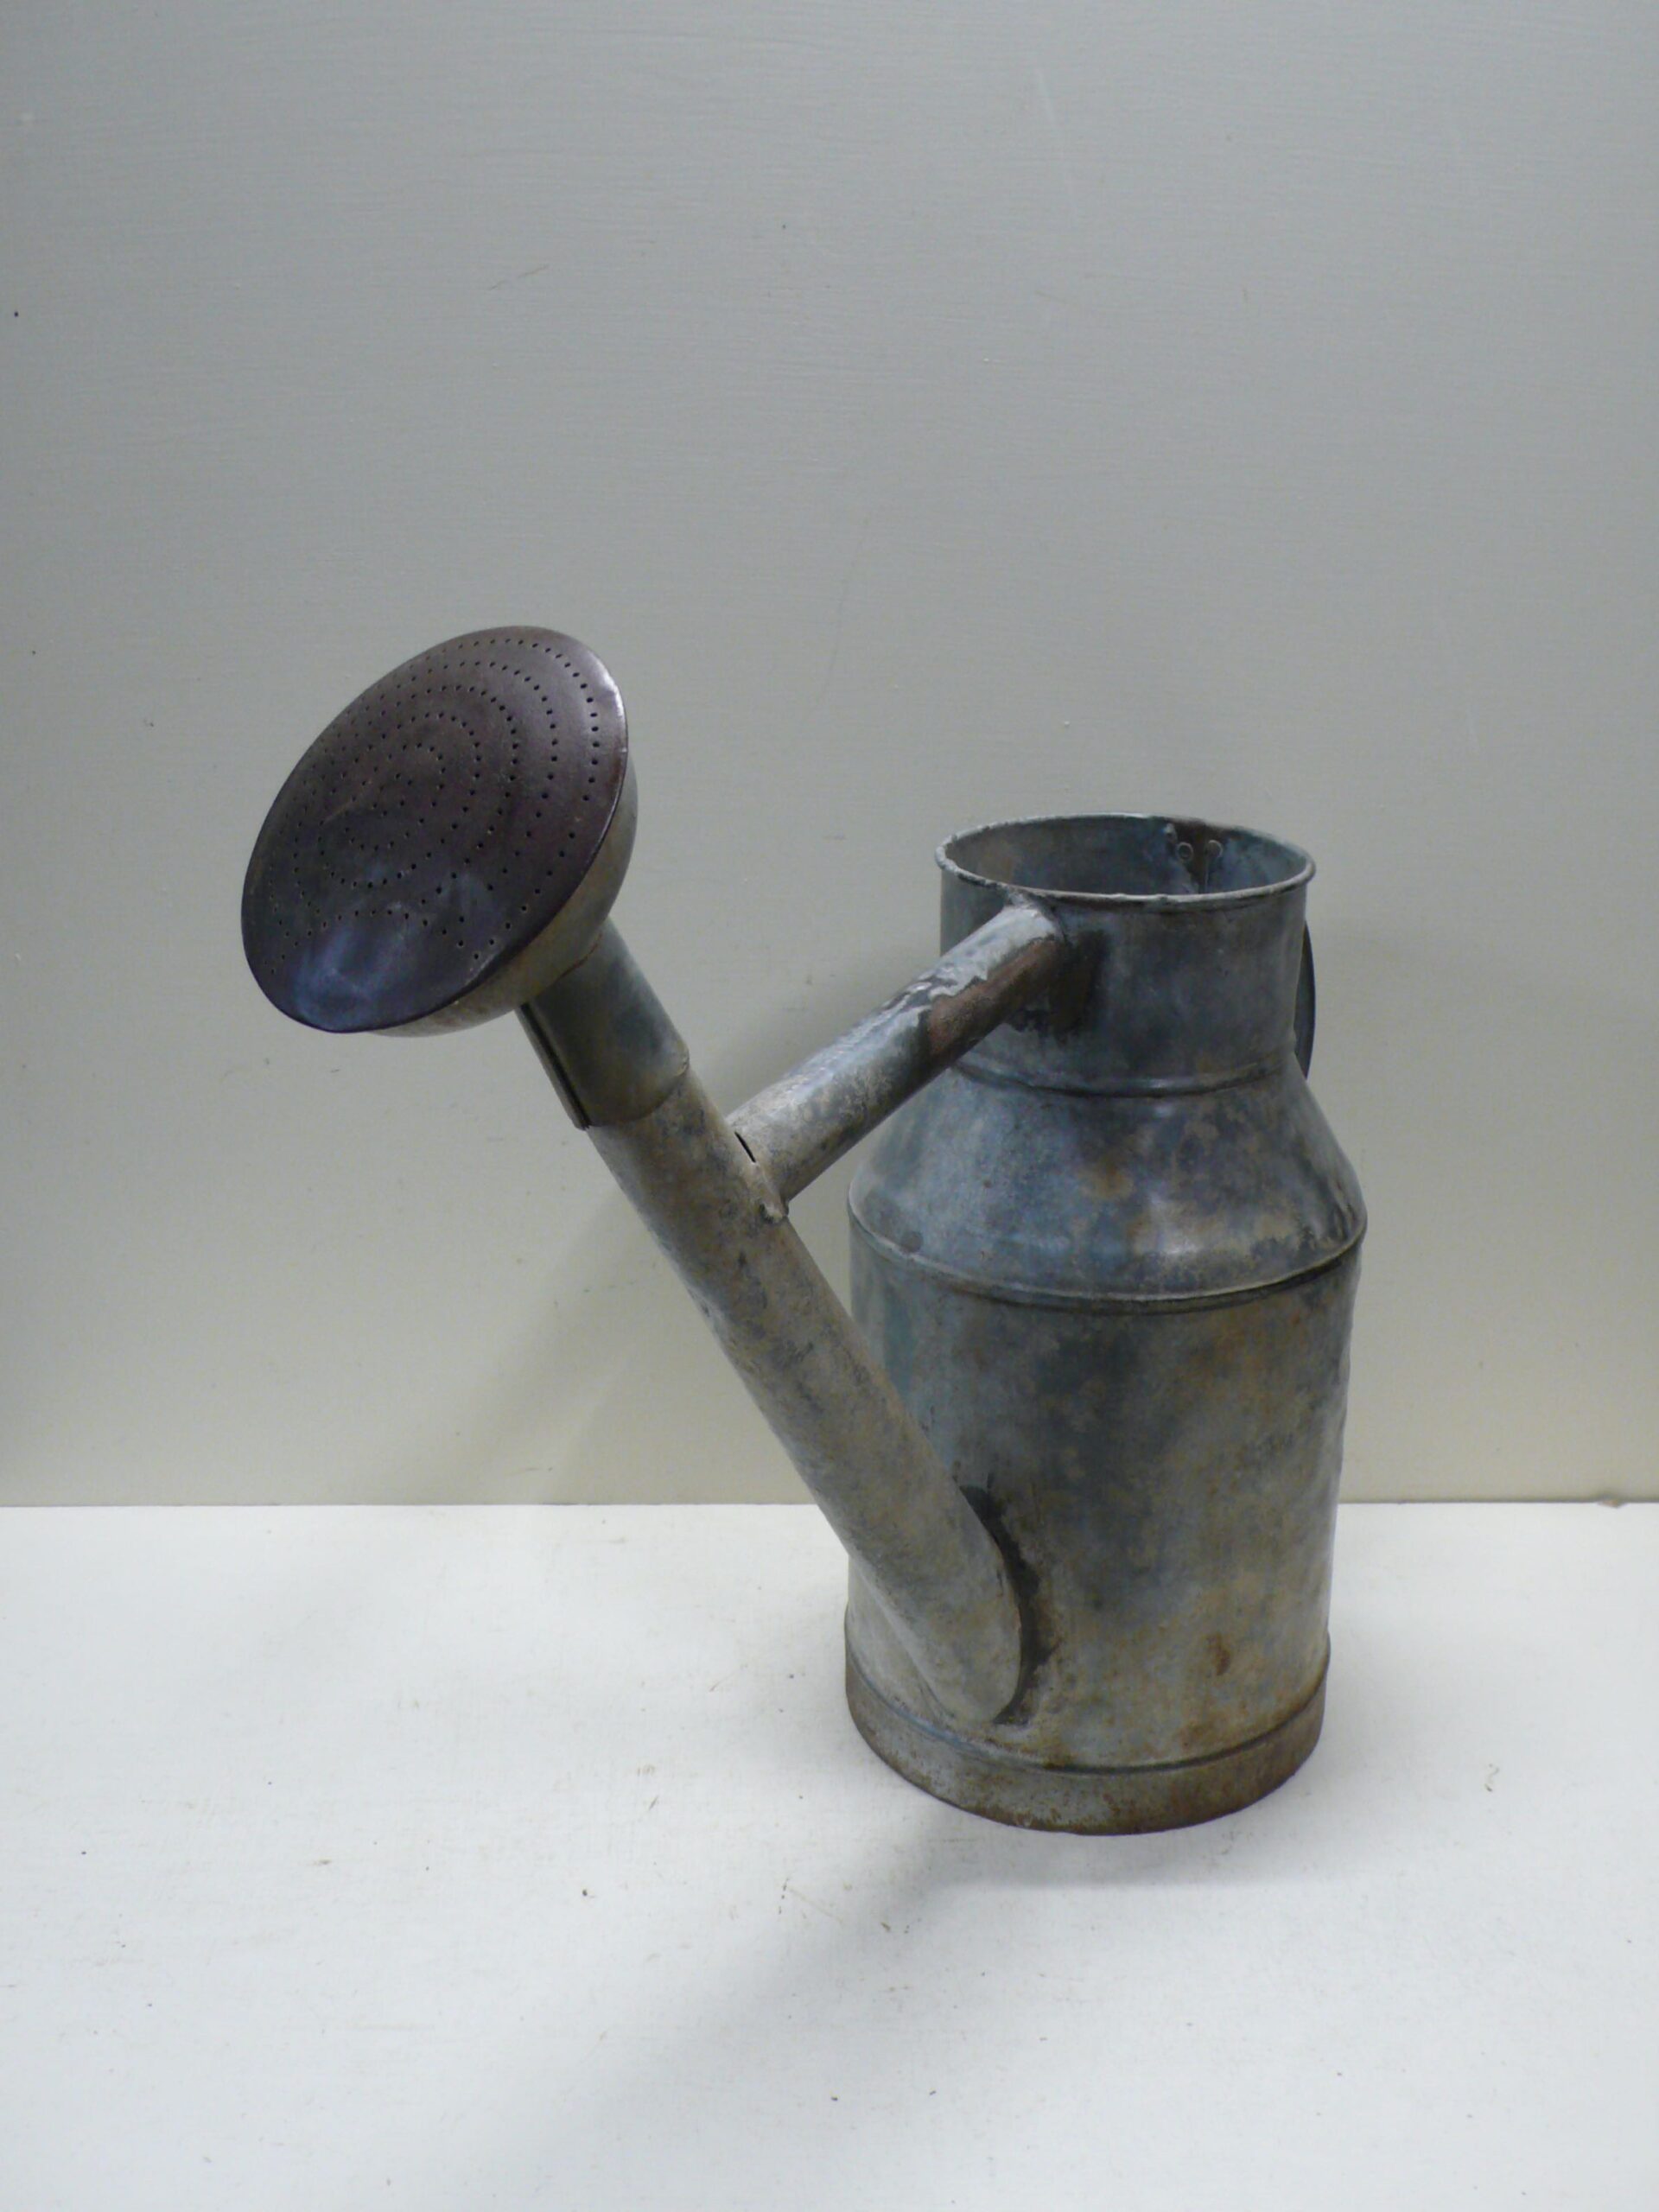 Rhone Style Watering Can